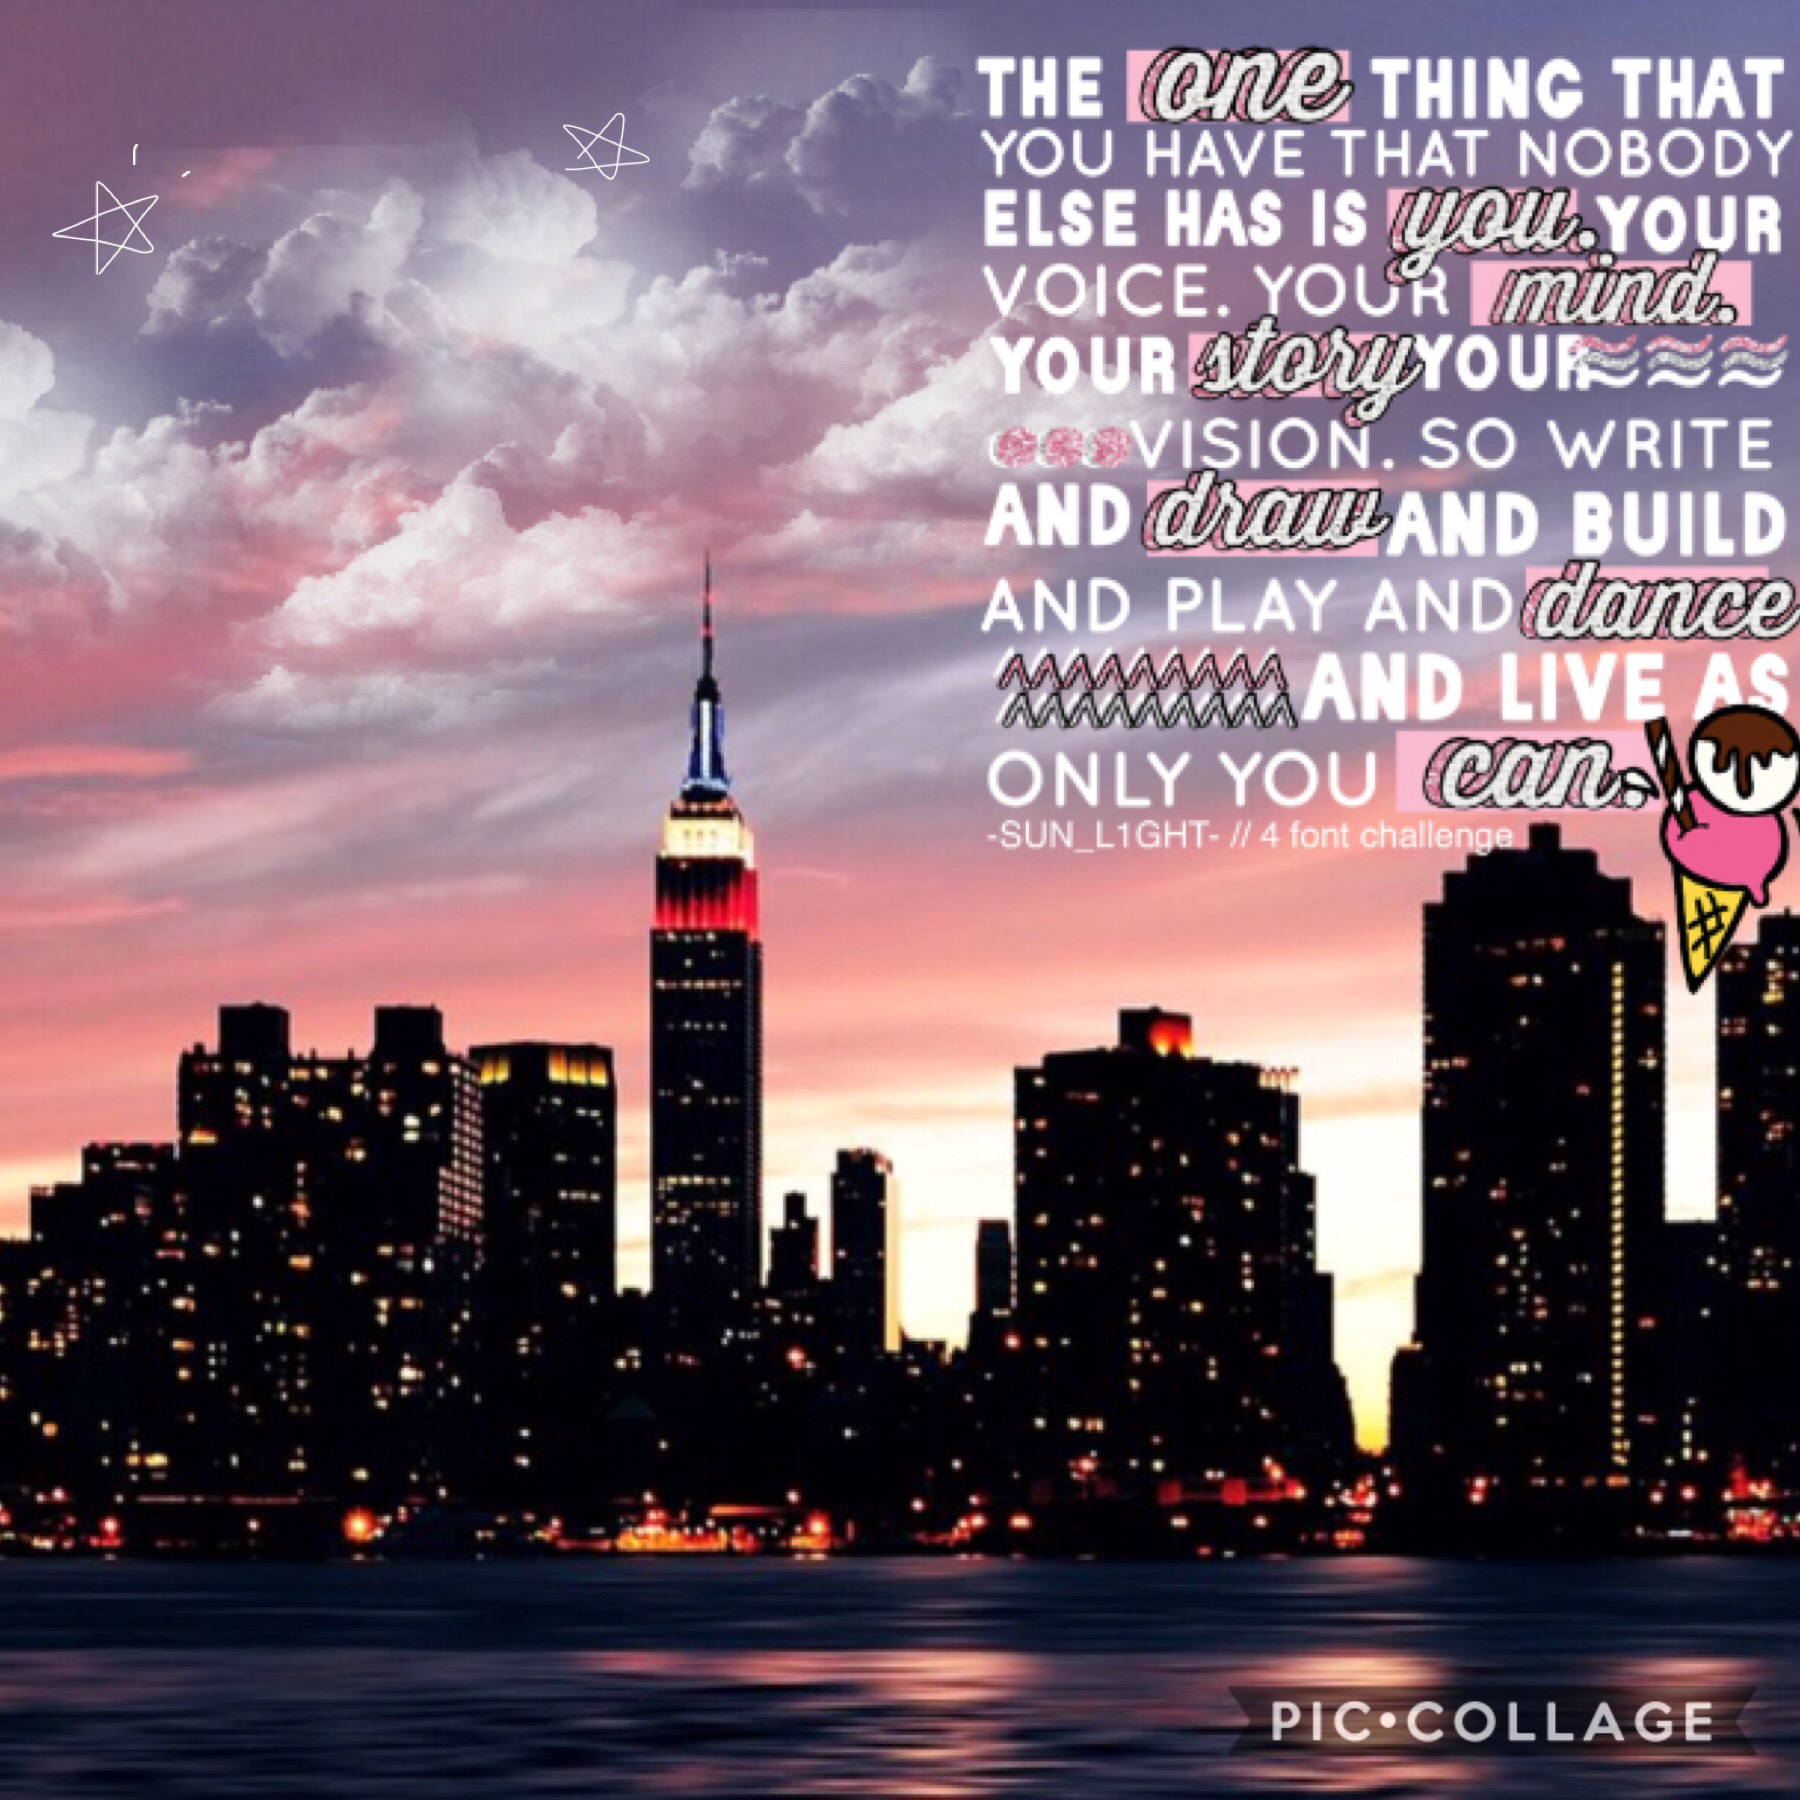 This ended up turning out really well! I didn’t think it would look this well! Plus only using 4 fonts! Tbh this is so far my favourite challenge! 😊💫 hope you all are well! #pconly! 😄3-8-18💘byeee!✨